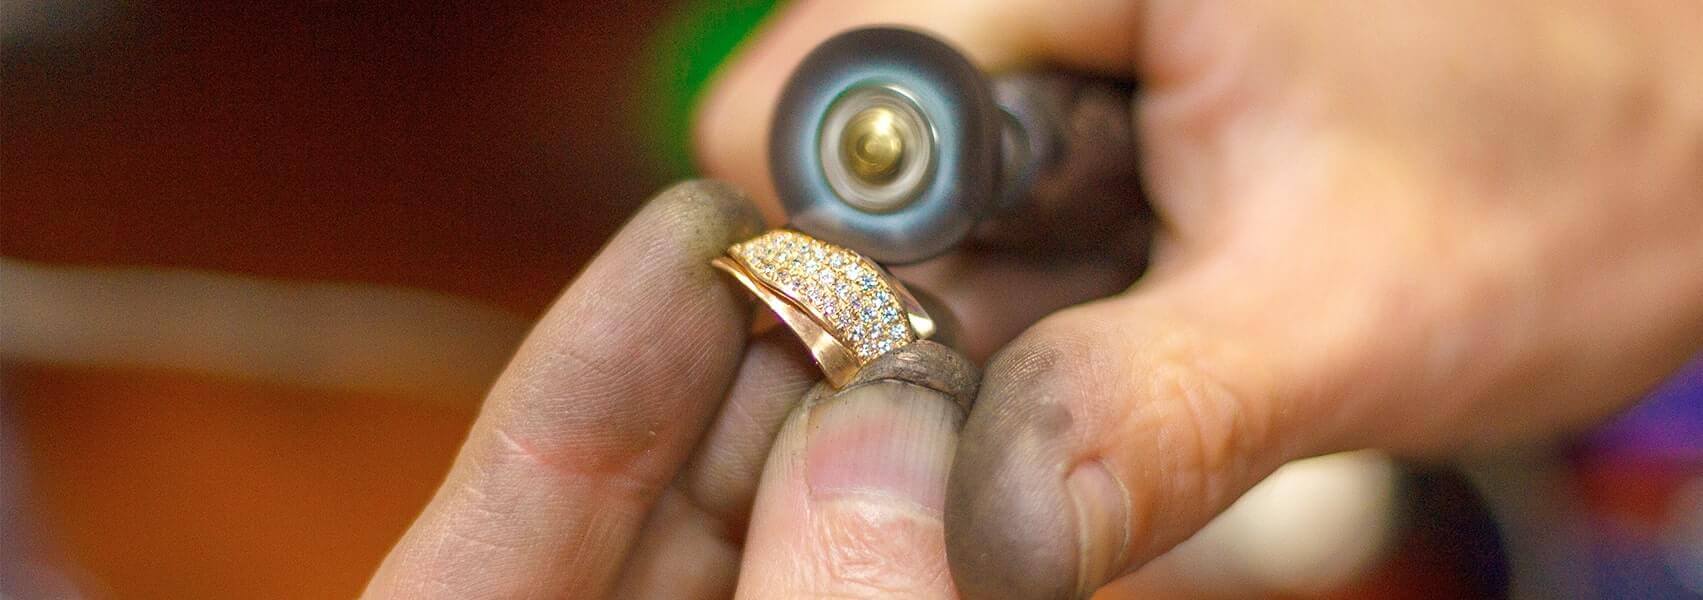 Jewelry Repair Costs & What To Expect – Long's Jewelers